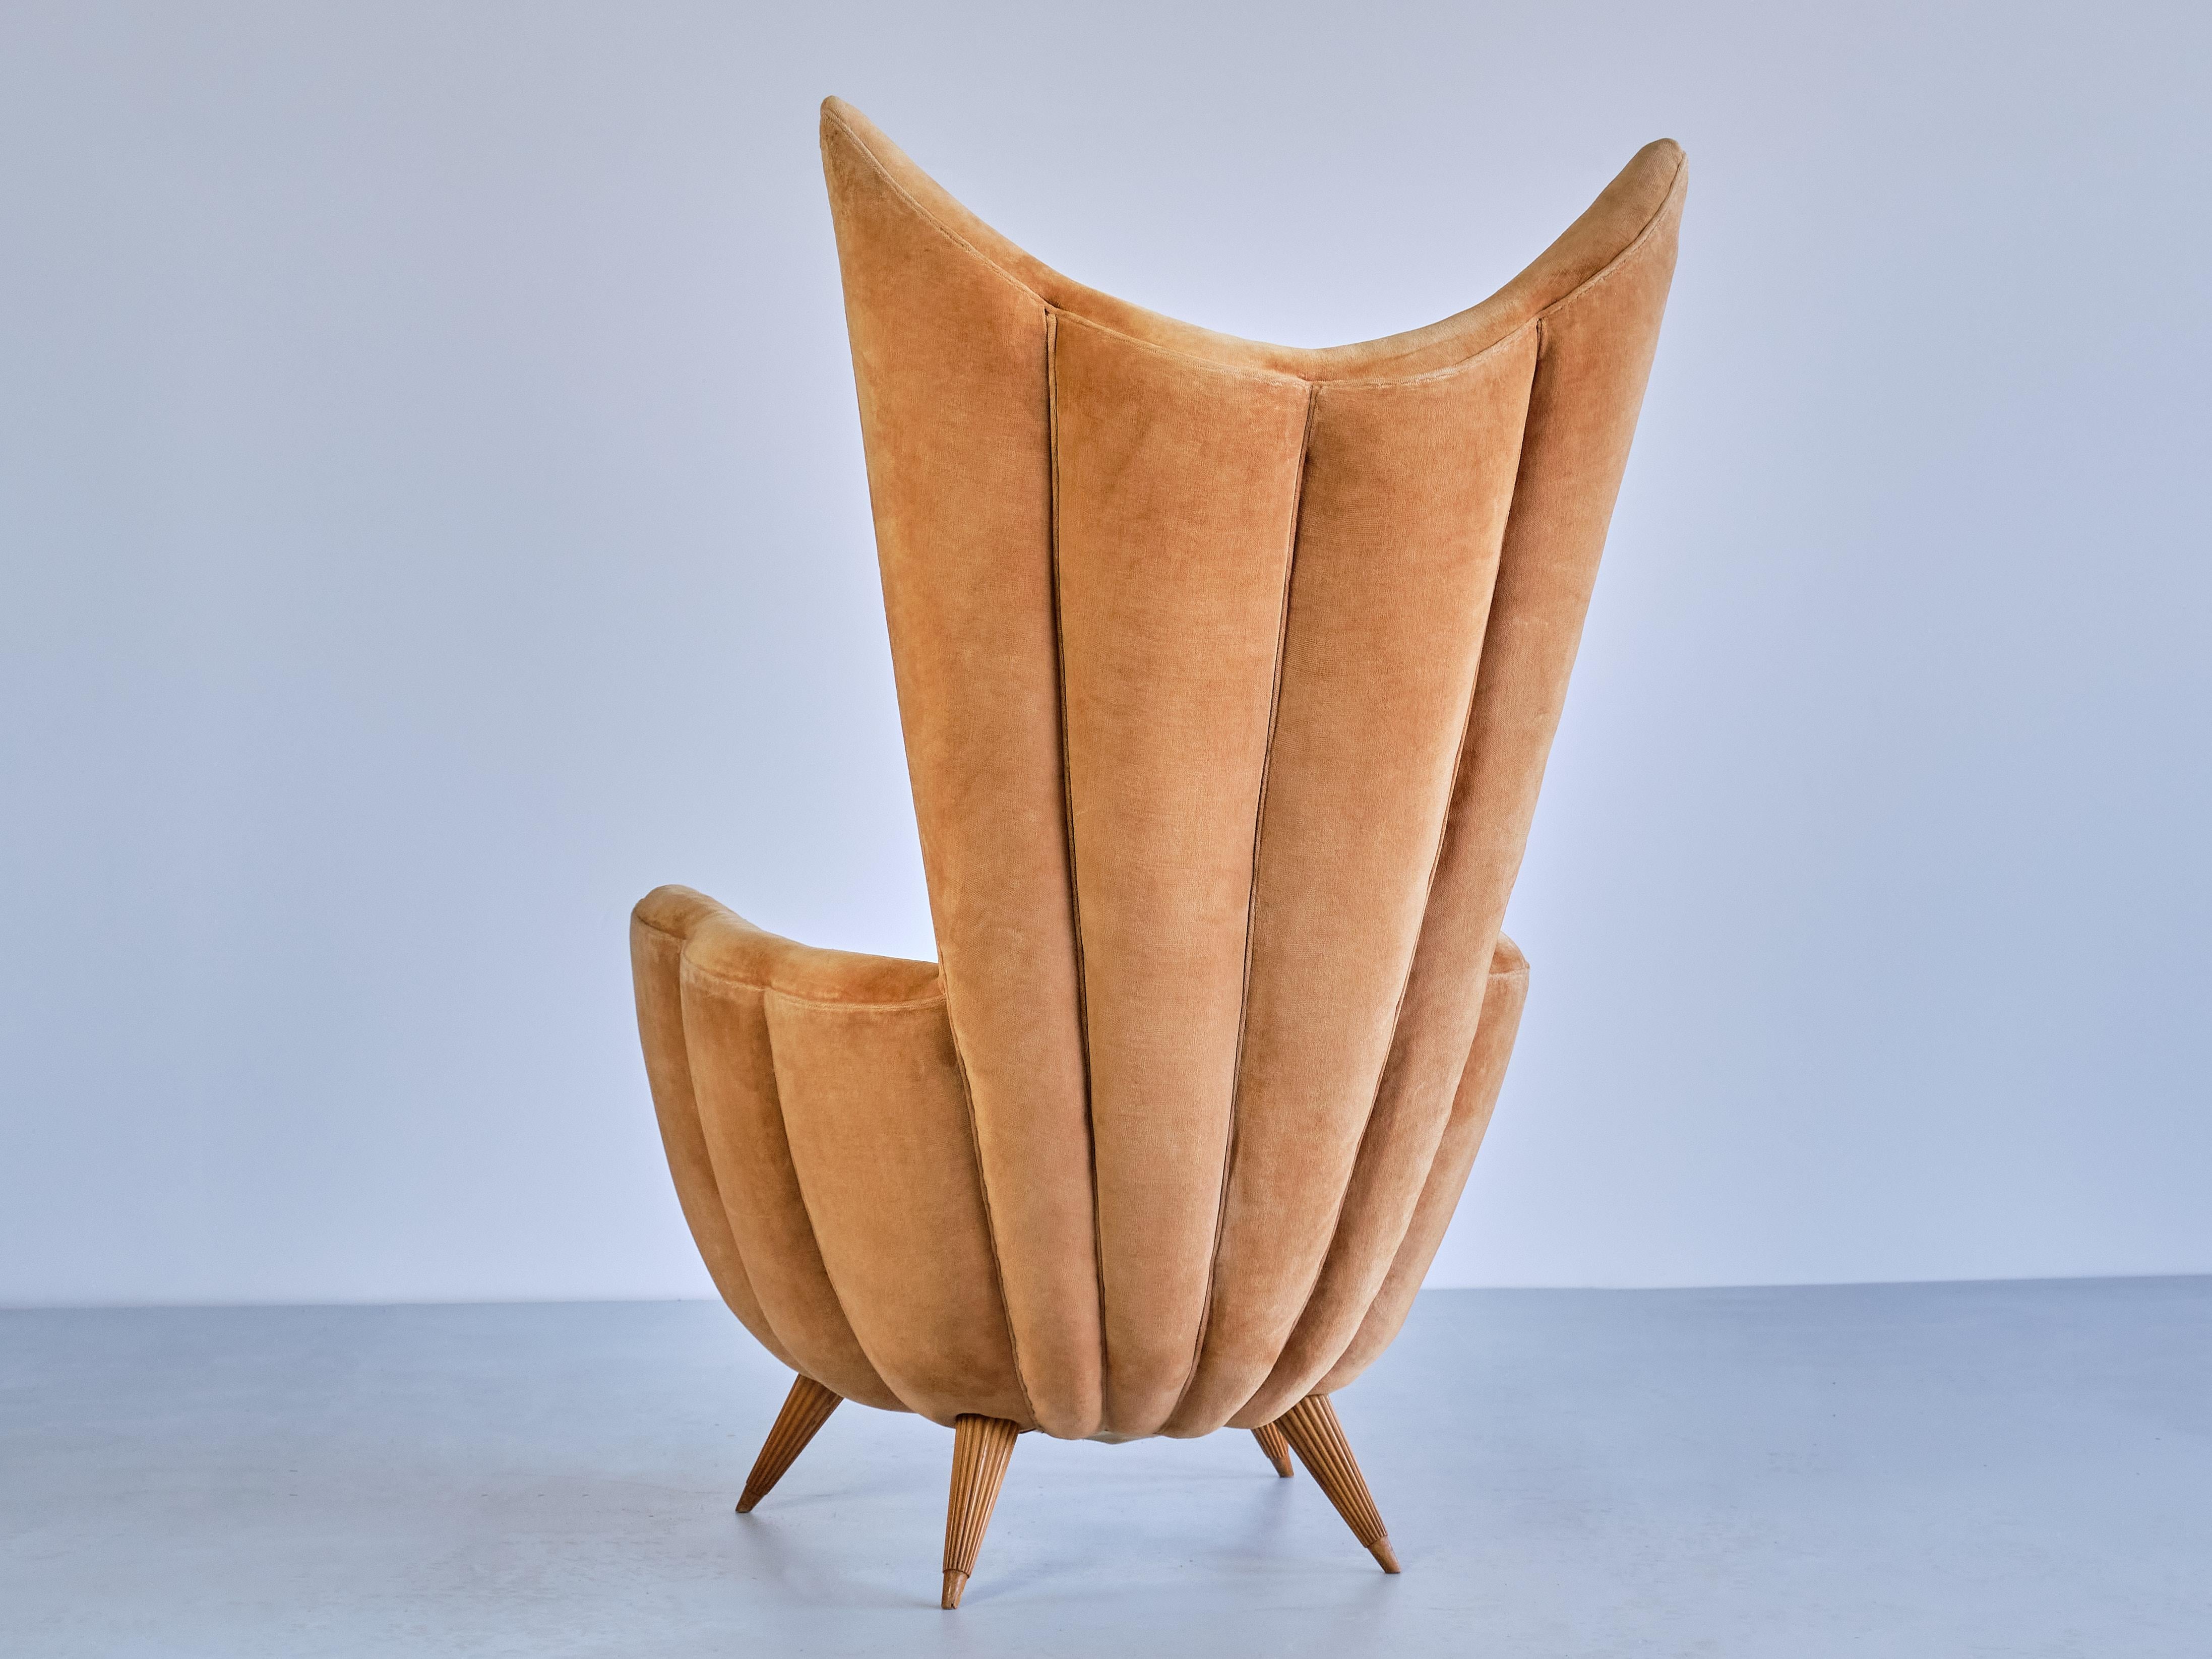 Exceptional Guglielmo Ulrich Armchair in Velvet and Fluted Walnut, Italy, 1940s For Sale 9